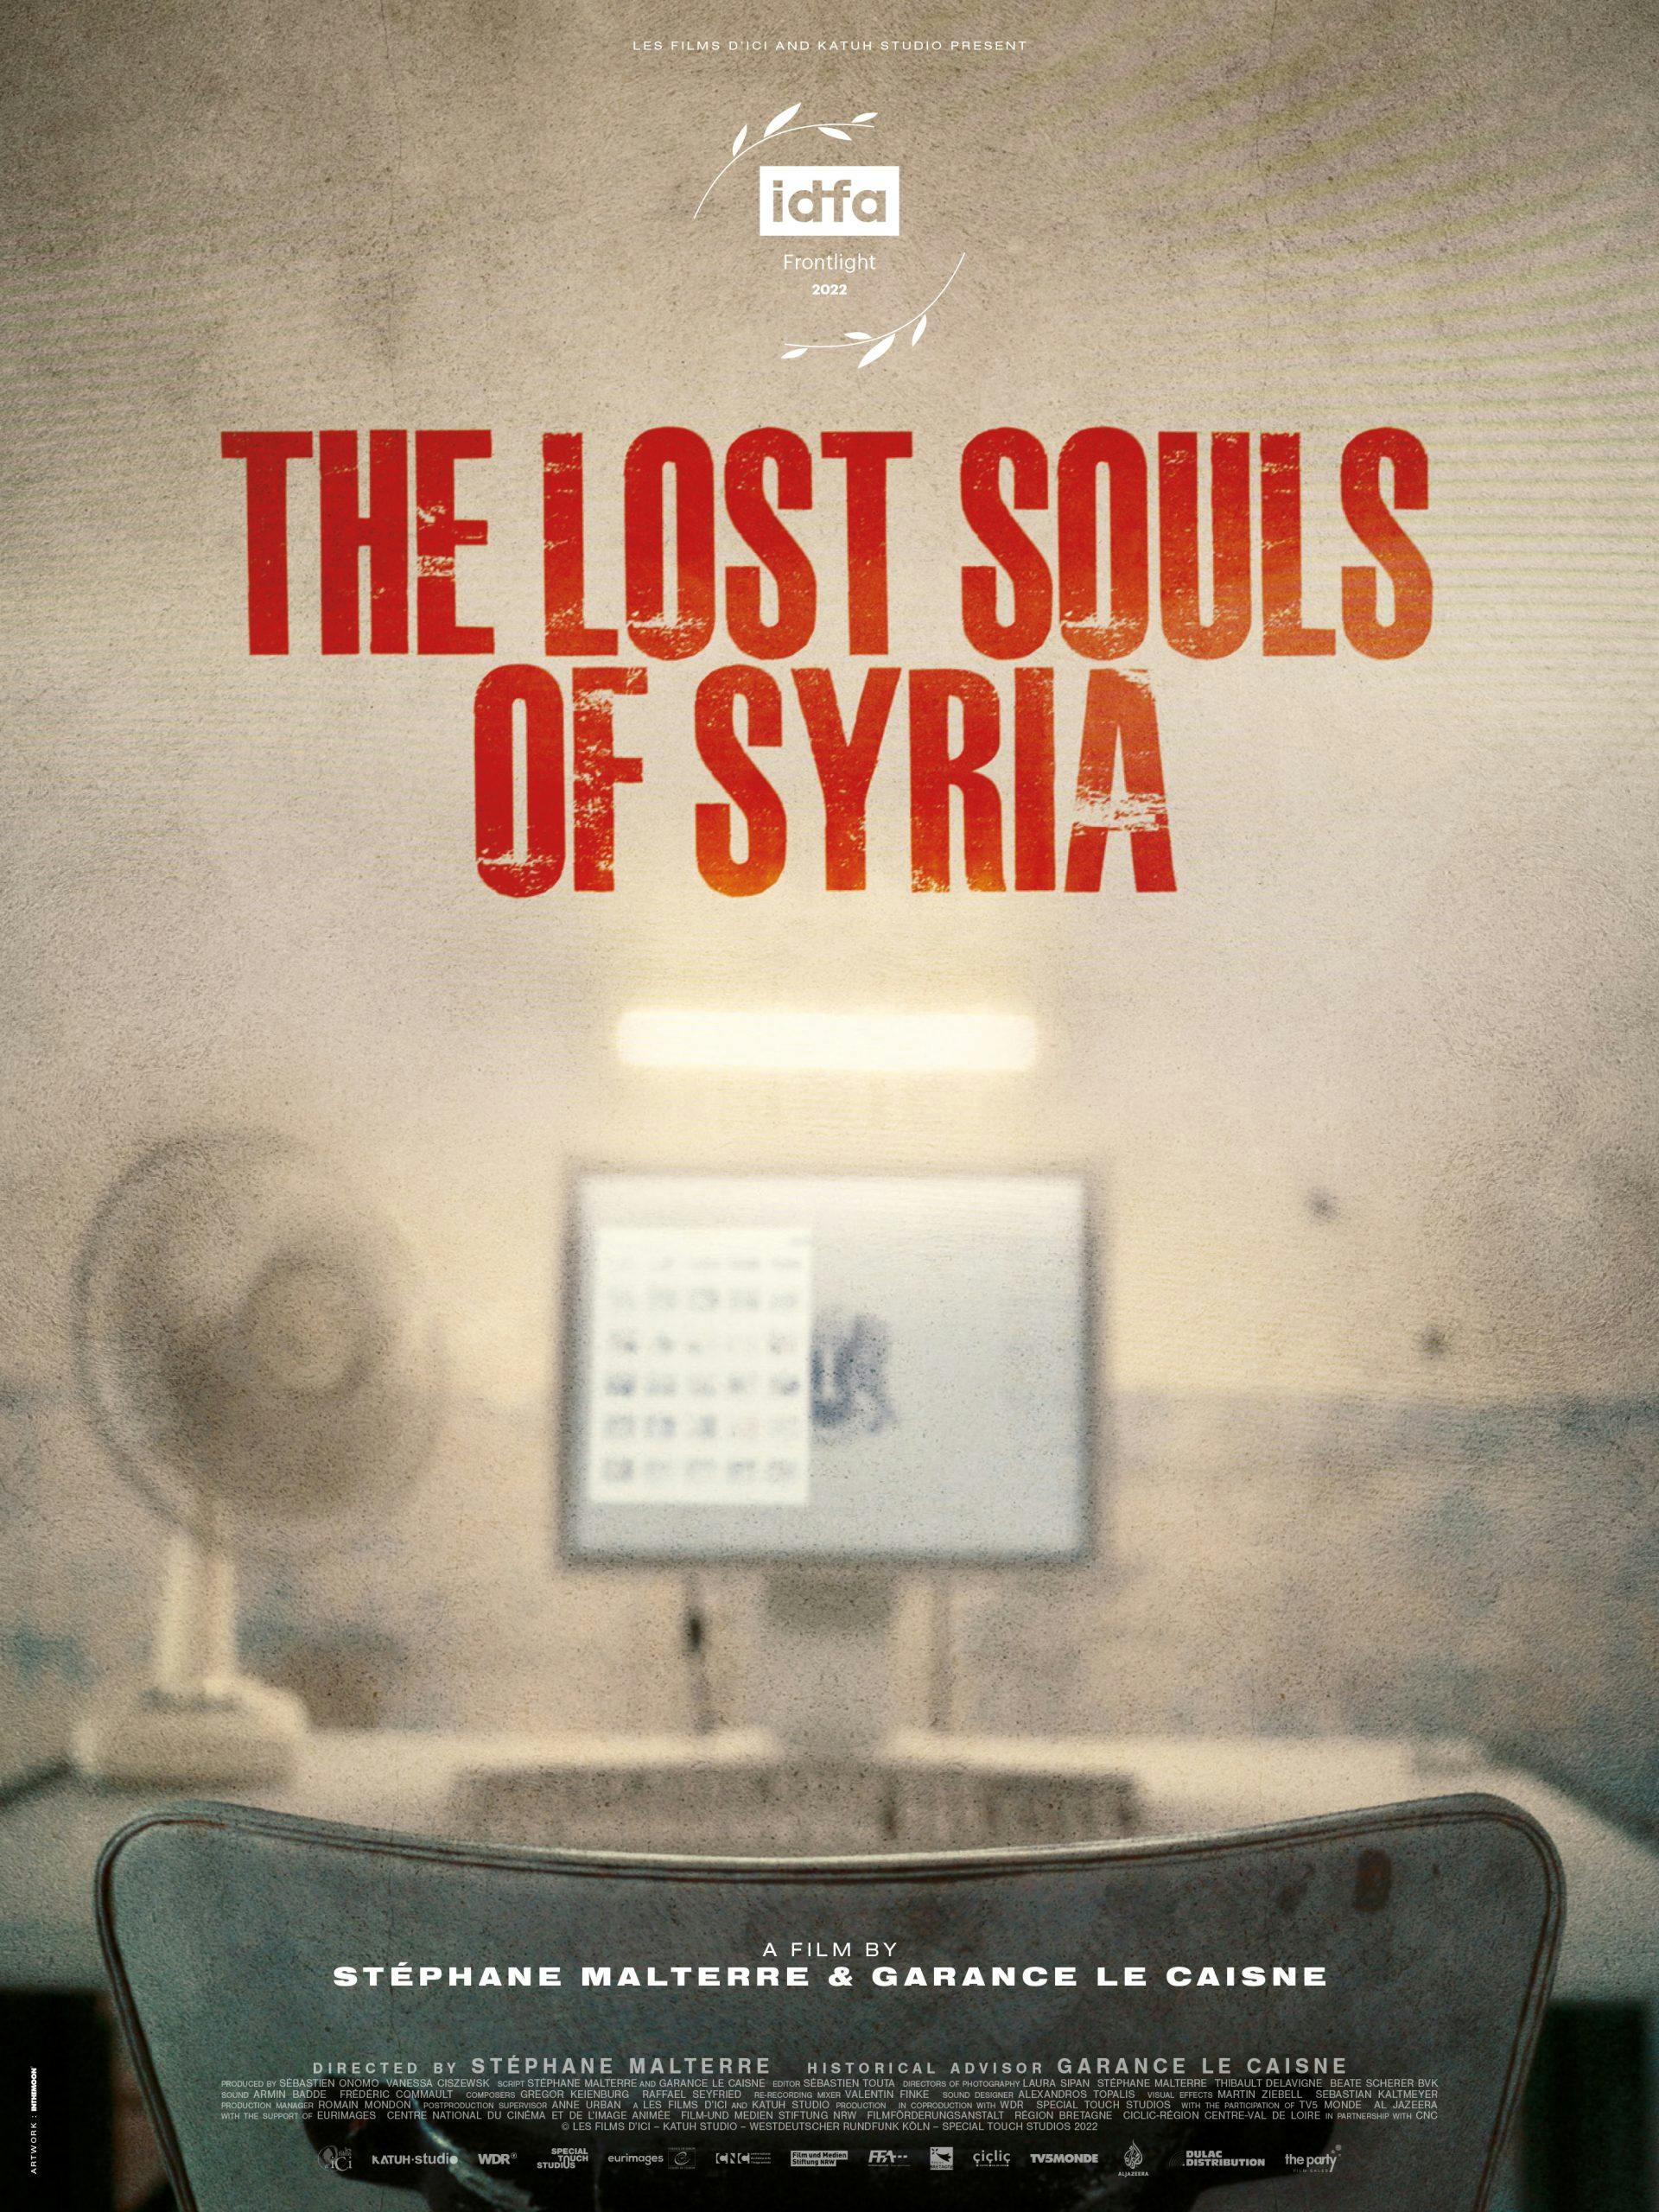 Lost souls of syria